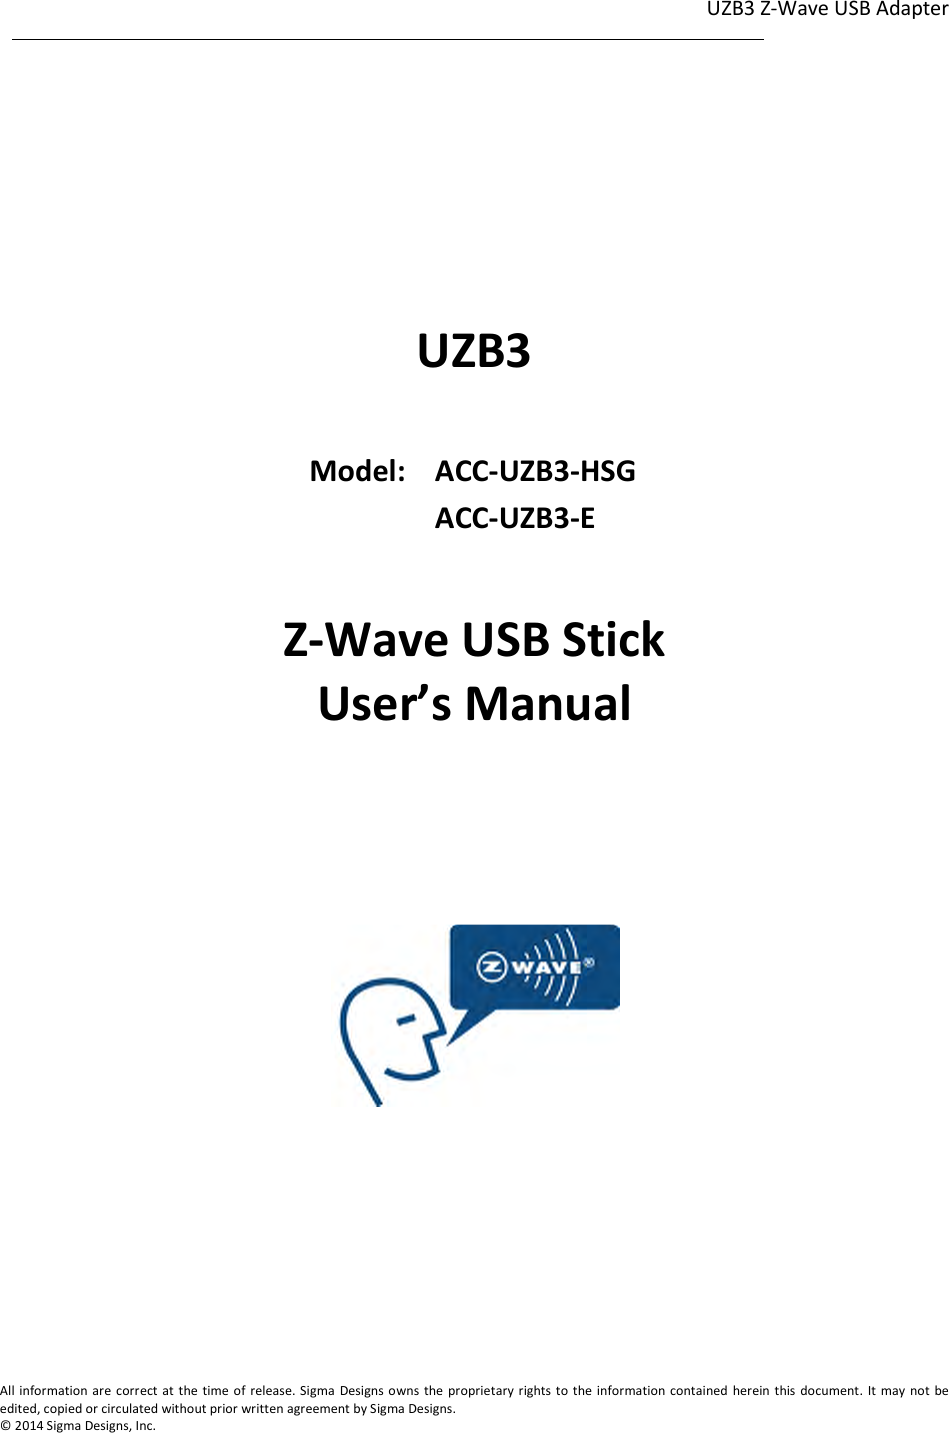 UZB3 Z-Wave USB Adapter  1                                                                                                                                                                                                             1              All information are correct at the time of release. Sigma  Designs owns  the proprietary rights to the information contained herein this document. It  may not  be edited, copied or circulated without prior written agreement by Sigma Designs.   © 2014 Sigma Designs, Inc.       UZB3    Model:  ACC-UZB3-HSG    ACC-UZB3-E  Z-Wave USB Stick User’s Manual           